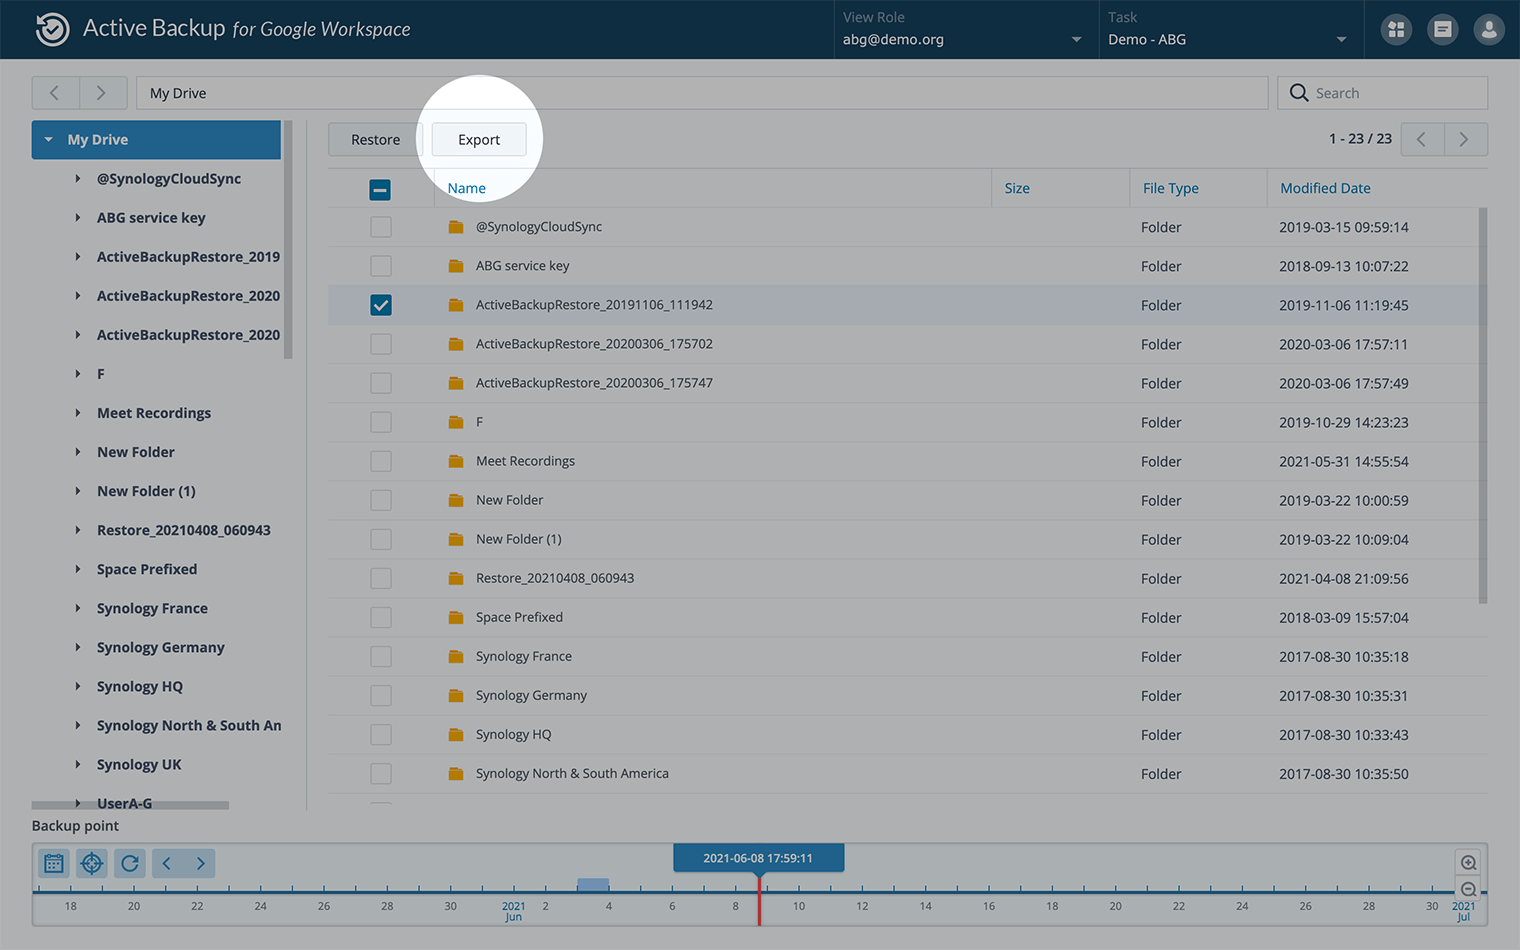 synology g suite backup